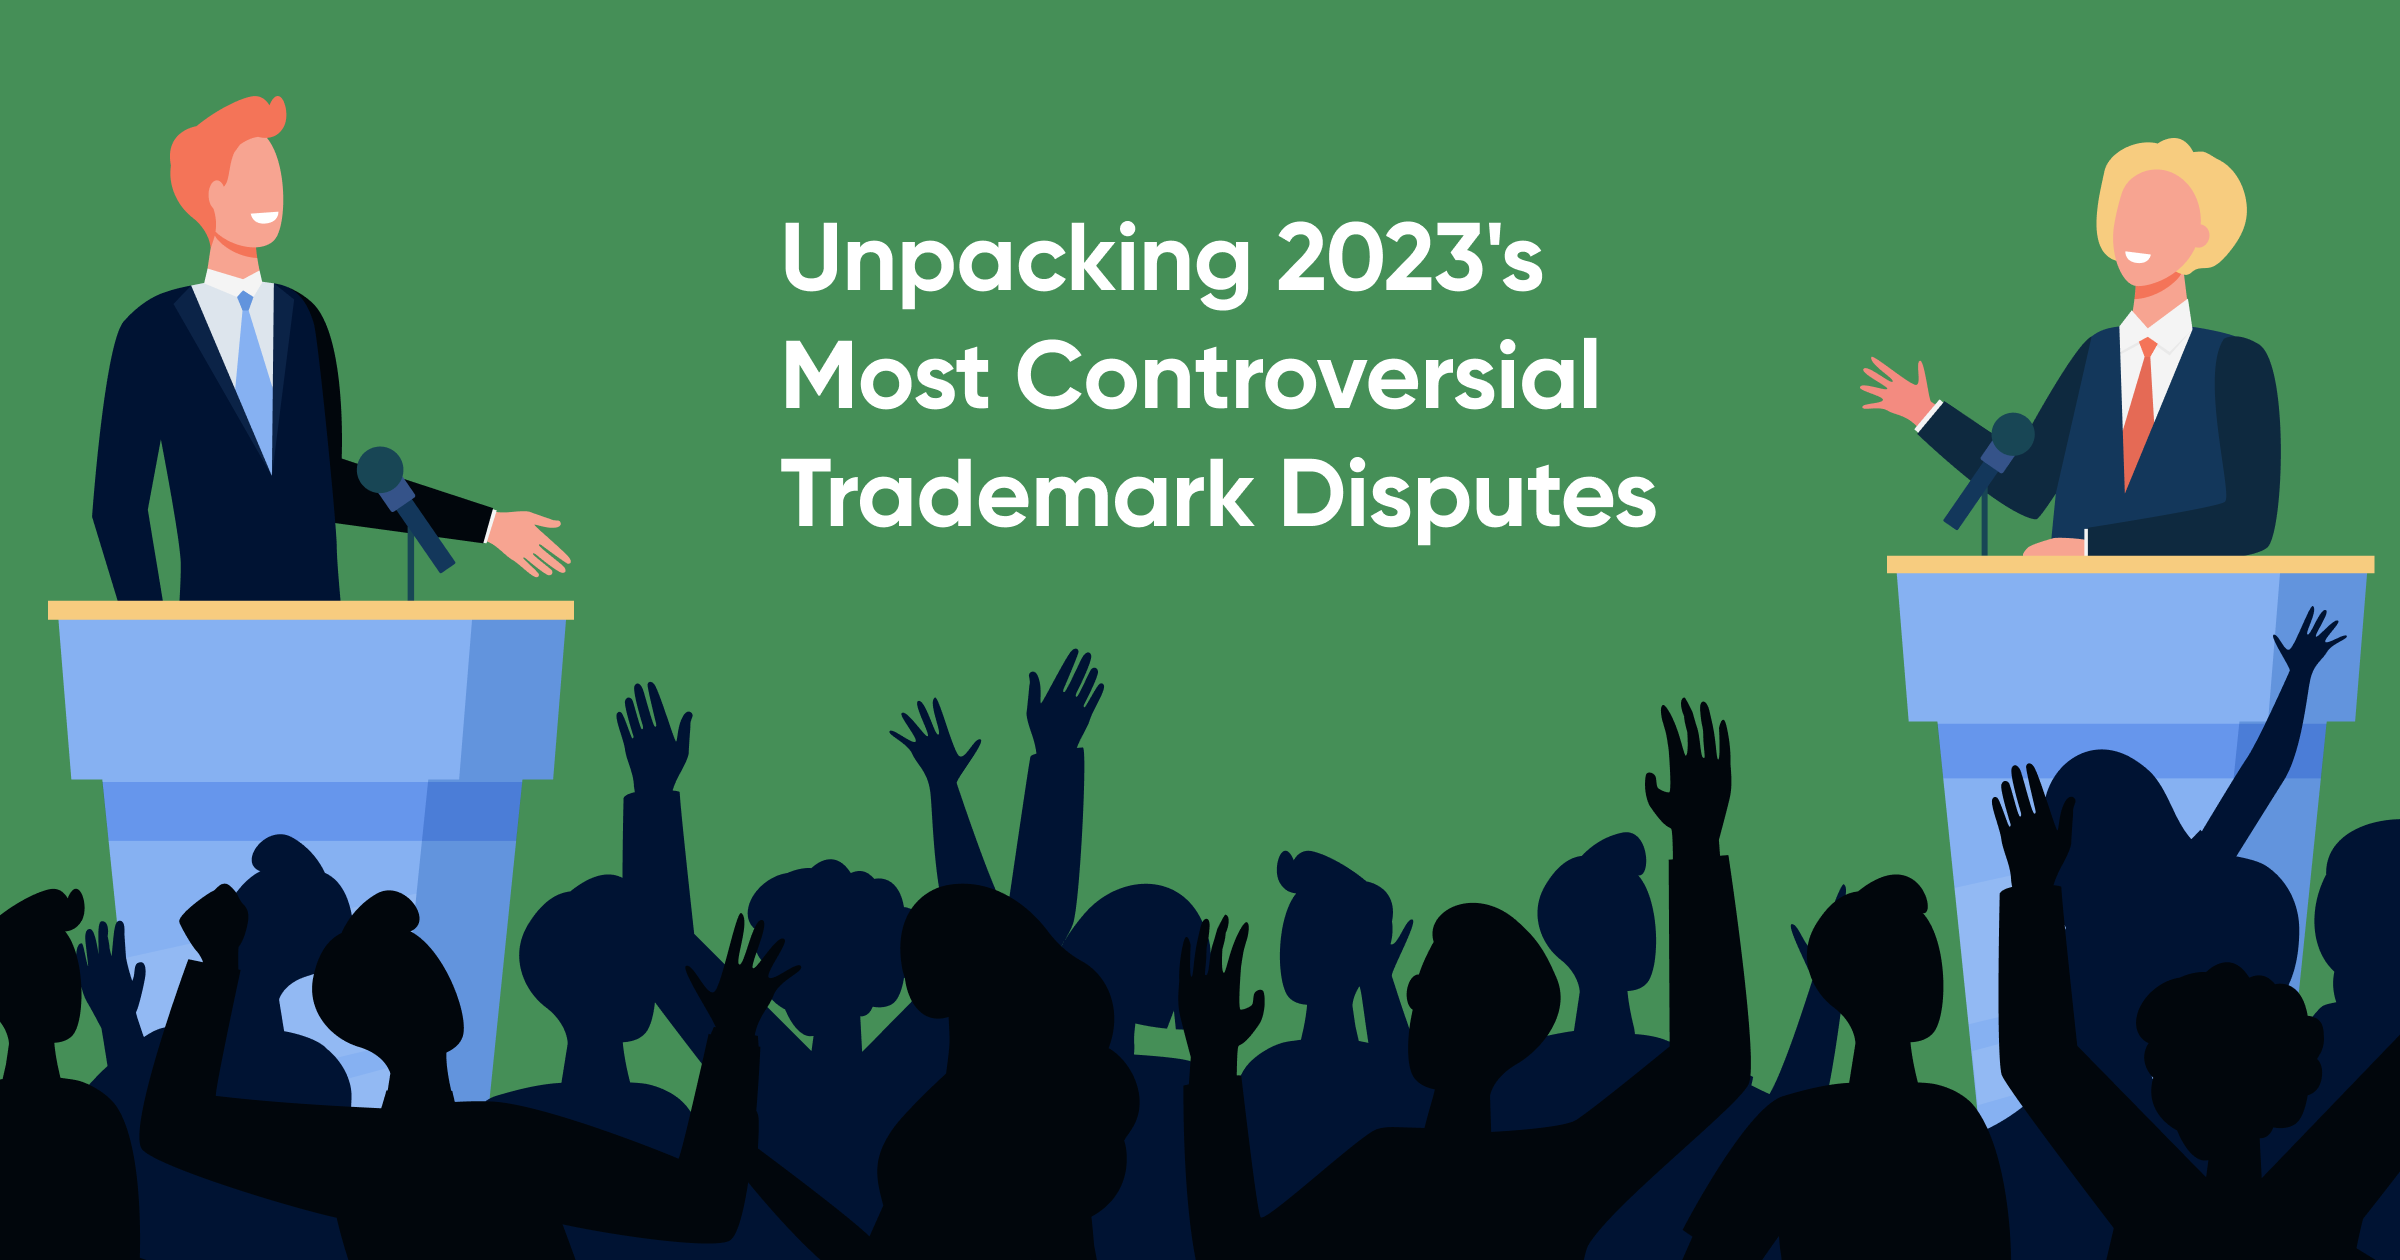 Trademark Titans or Bullies? Unpacking 2023's Most Controversial Trademark Disputes